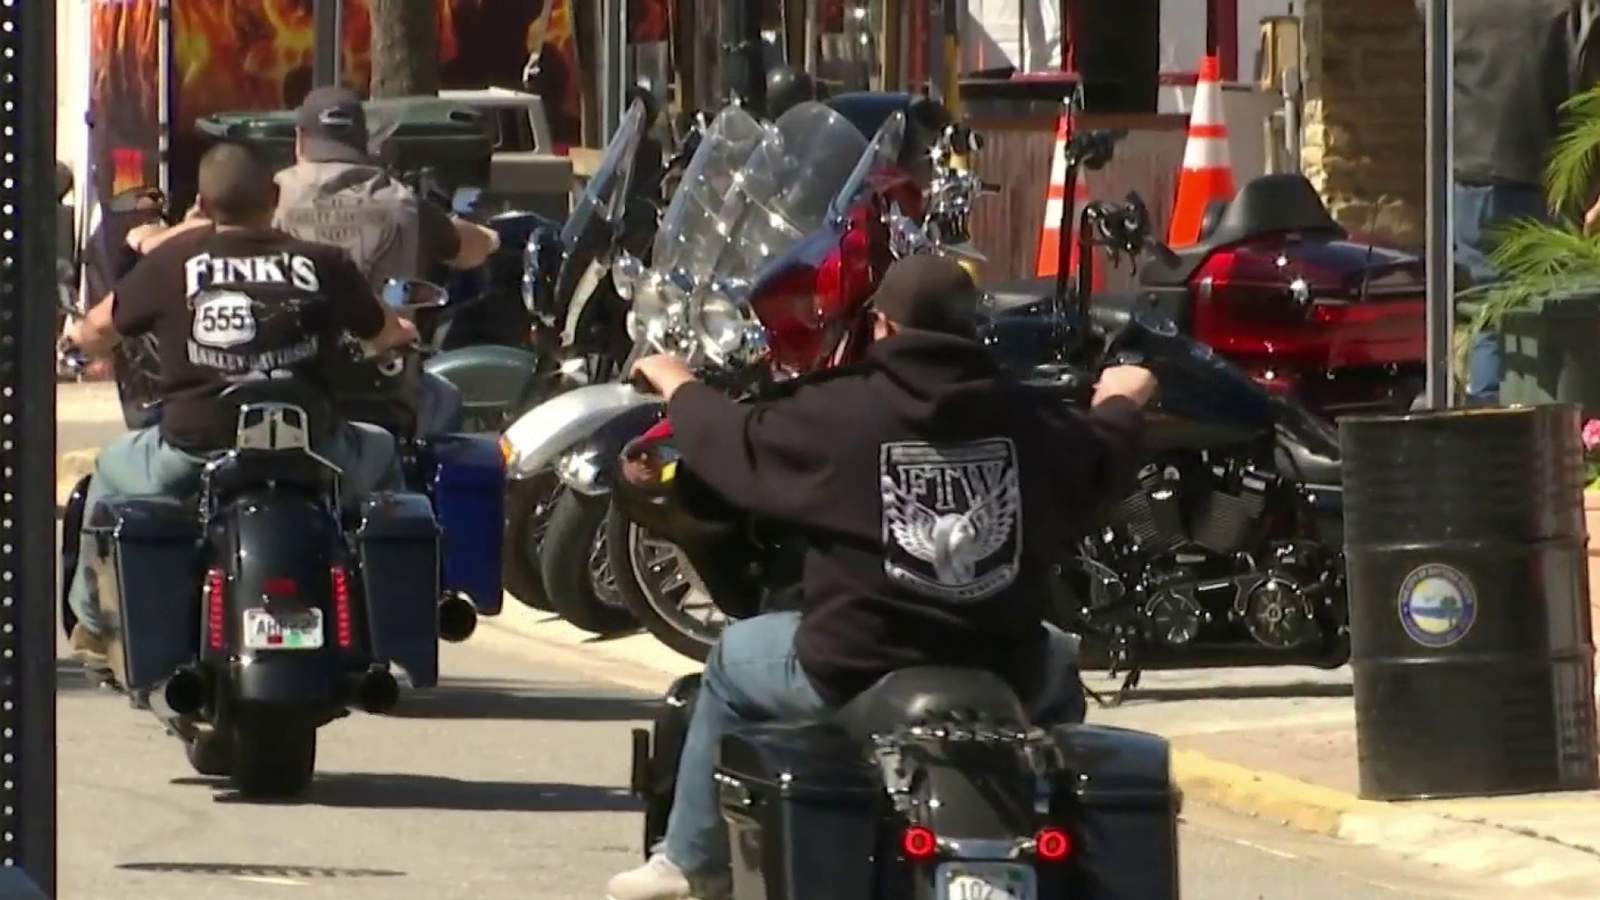 Hospital sees record number of trauma patients during Bike Week in Daytona Beach